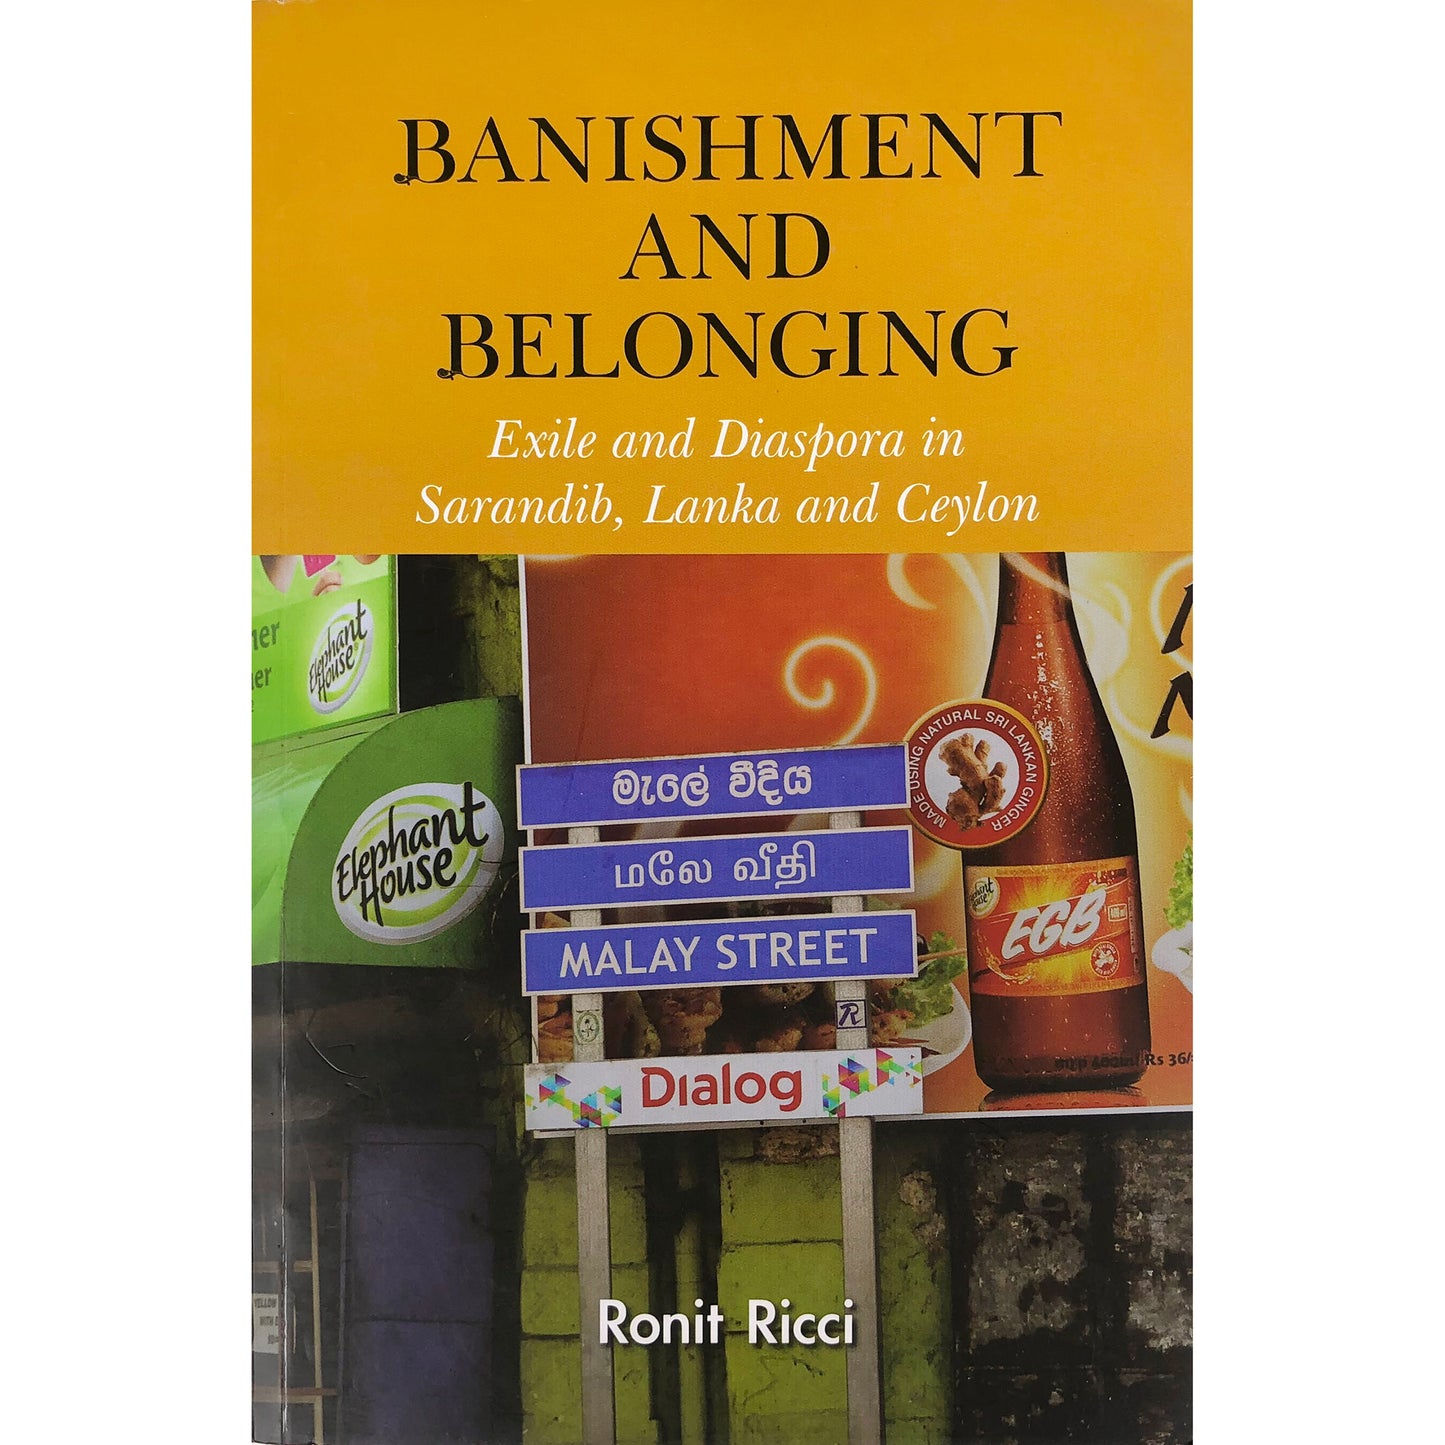 Banishment and Belonging: Exile and Diaspora in Serendib, Lanka and Ceylon by Ronit Ricci